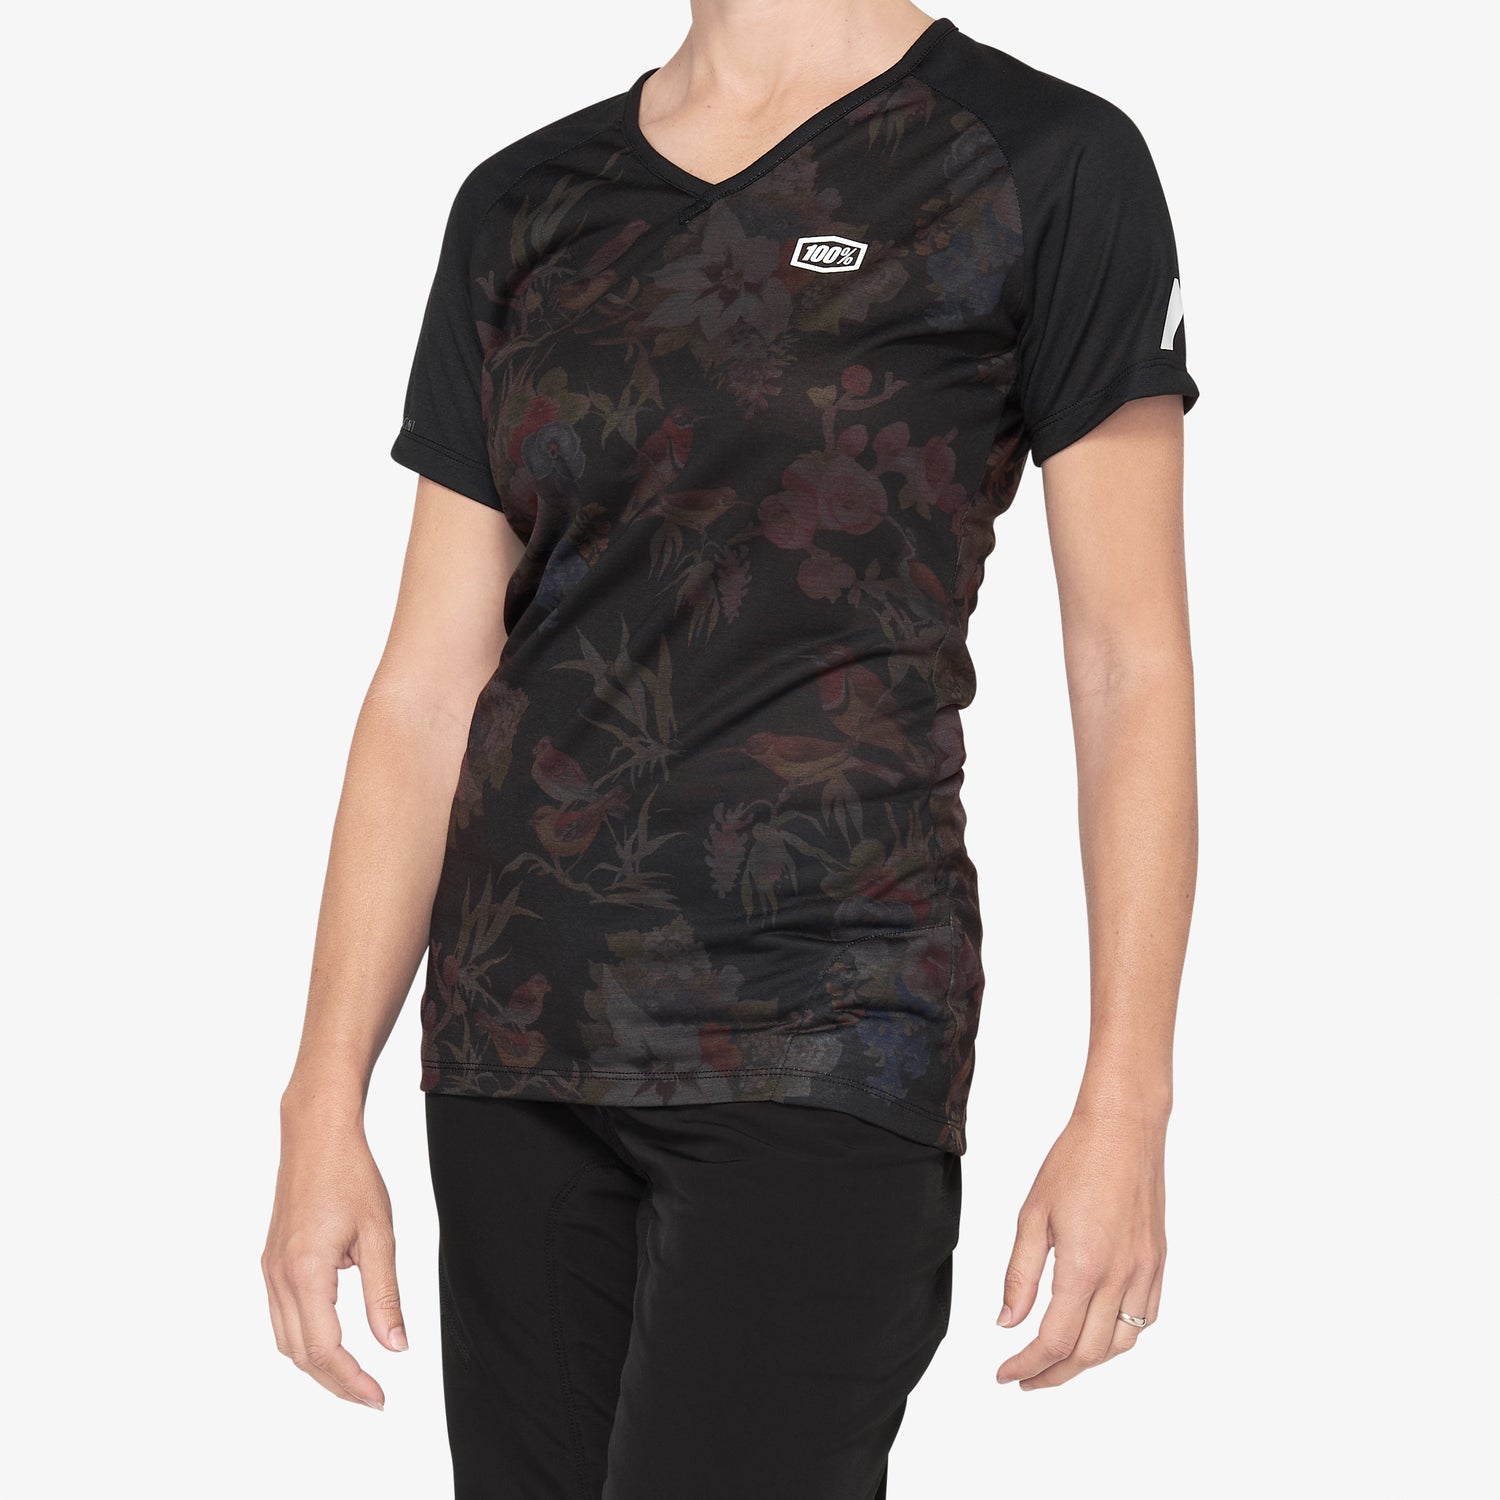 Airmatic womens jersey black floral